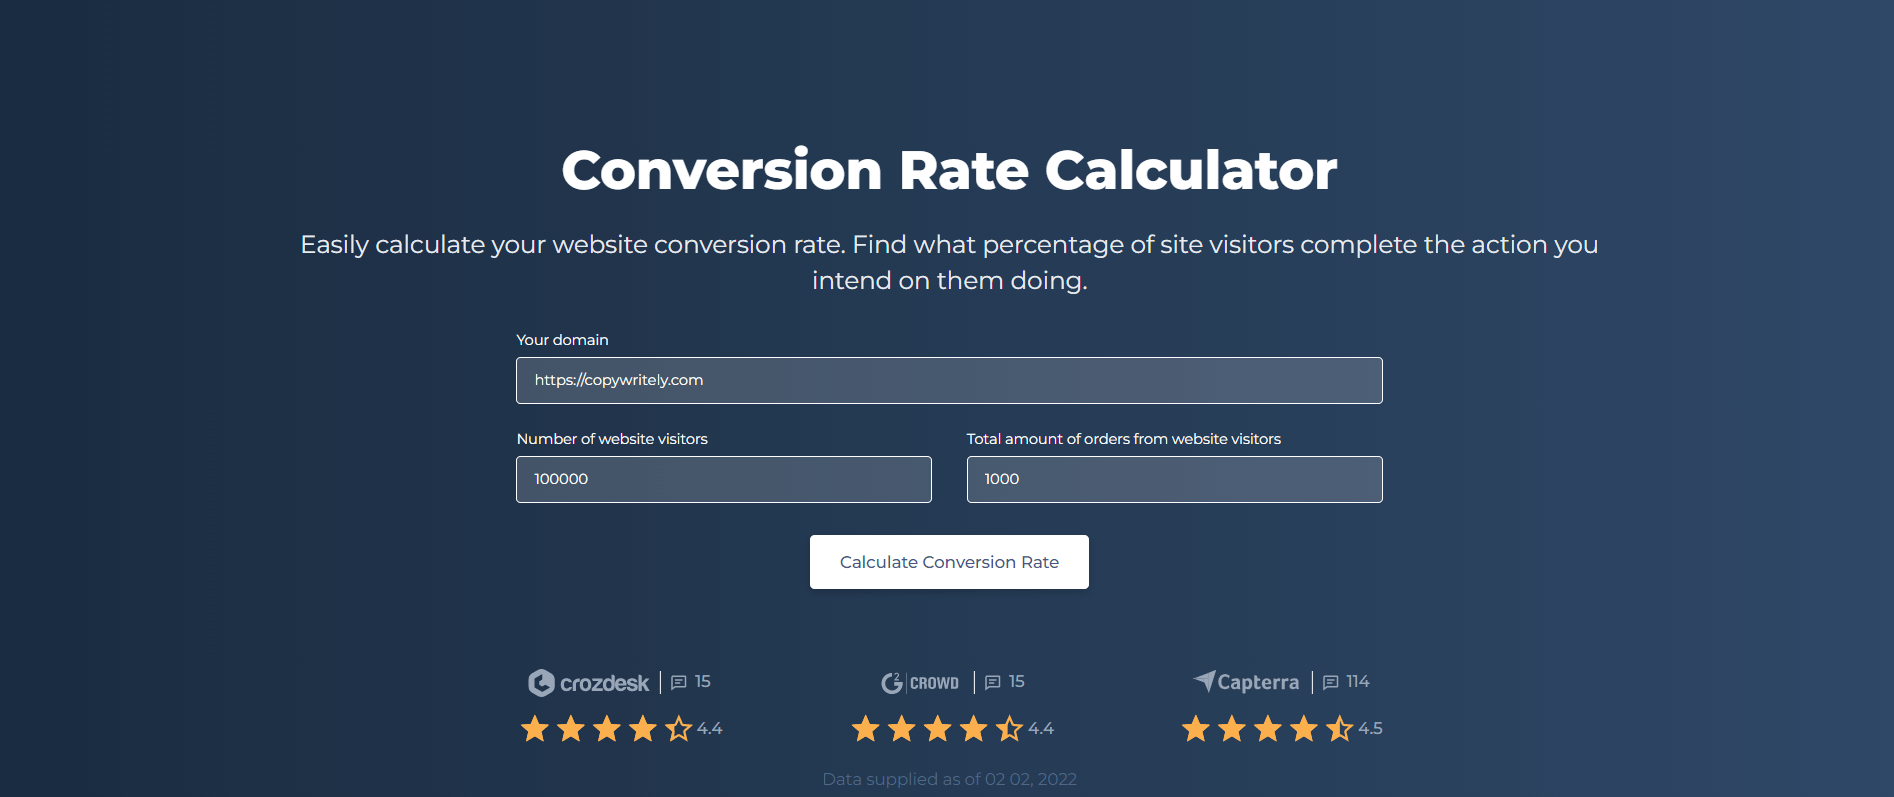 conversion rate calculator page with sample numbers & high accuracy